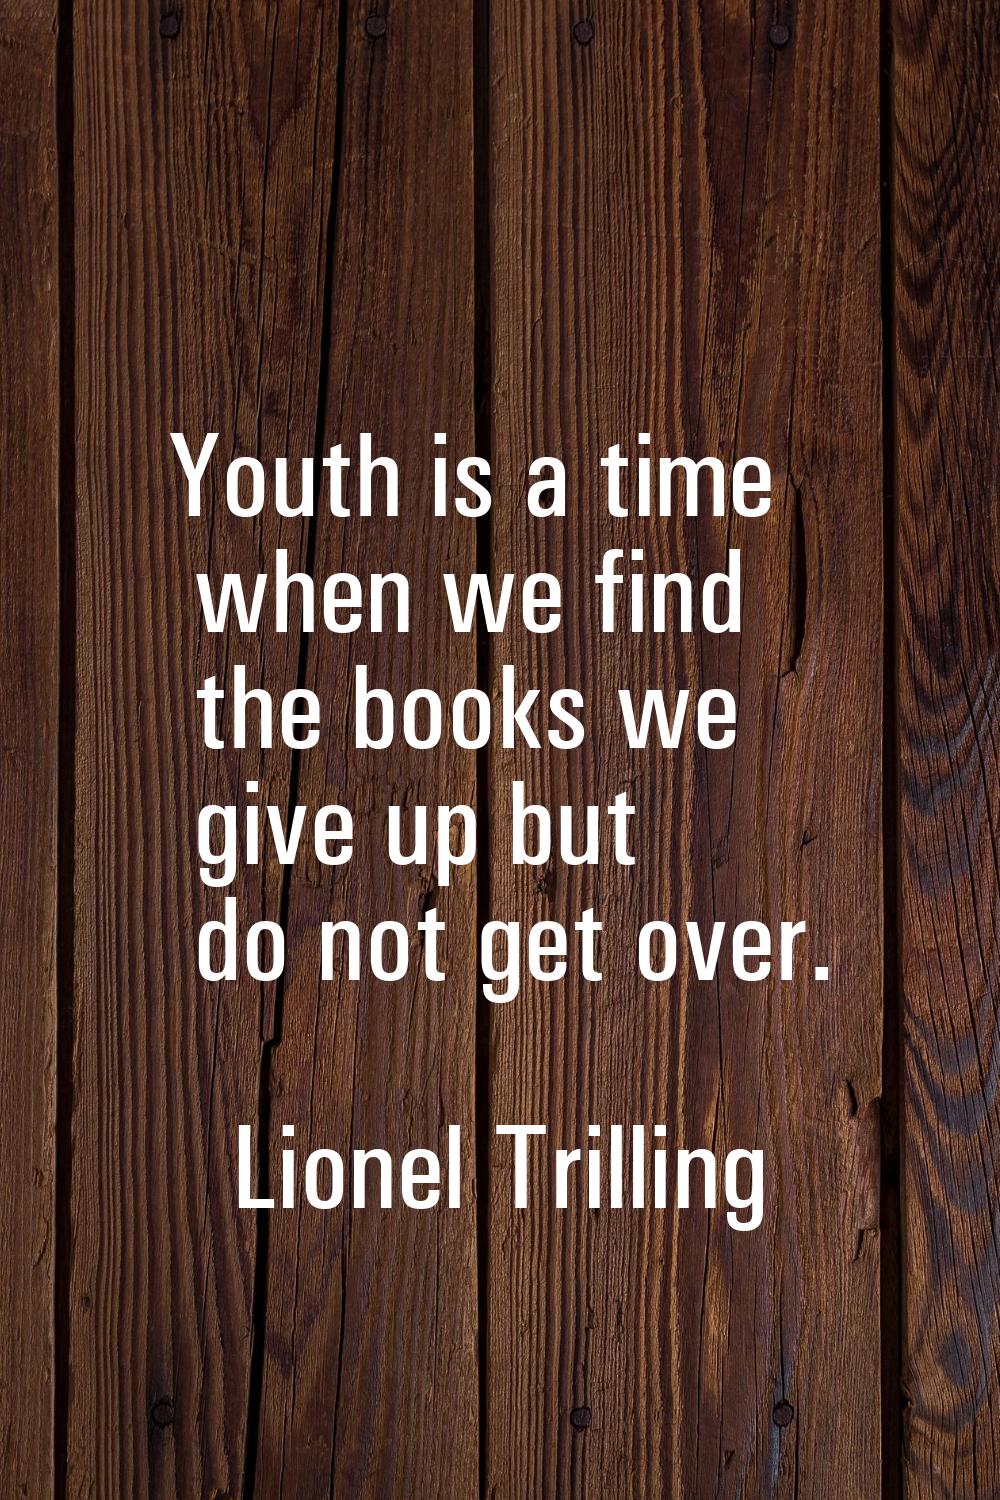 Youth is a time when we find the books we give up but do not get over.